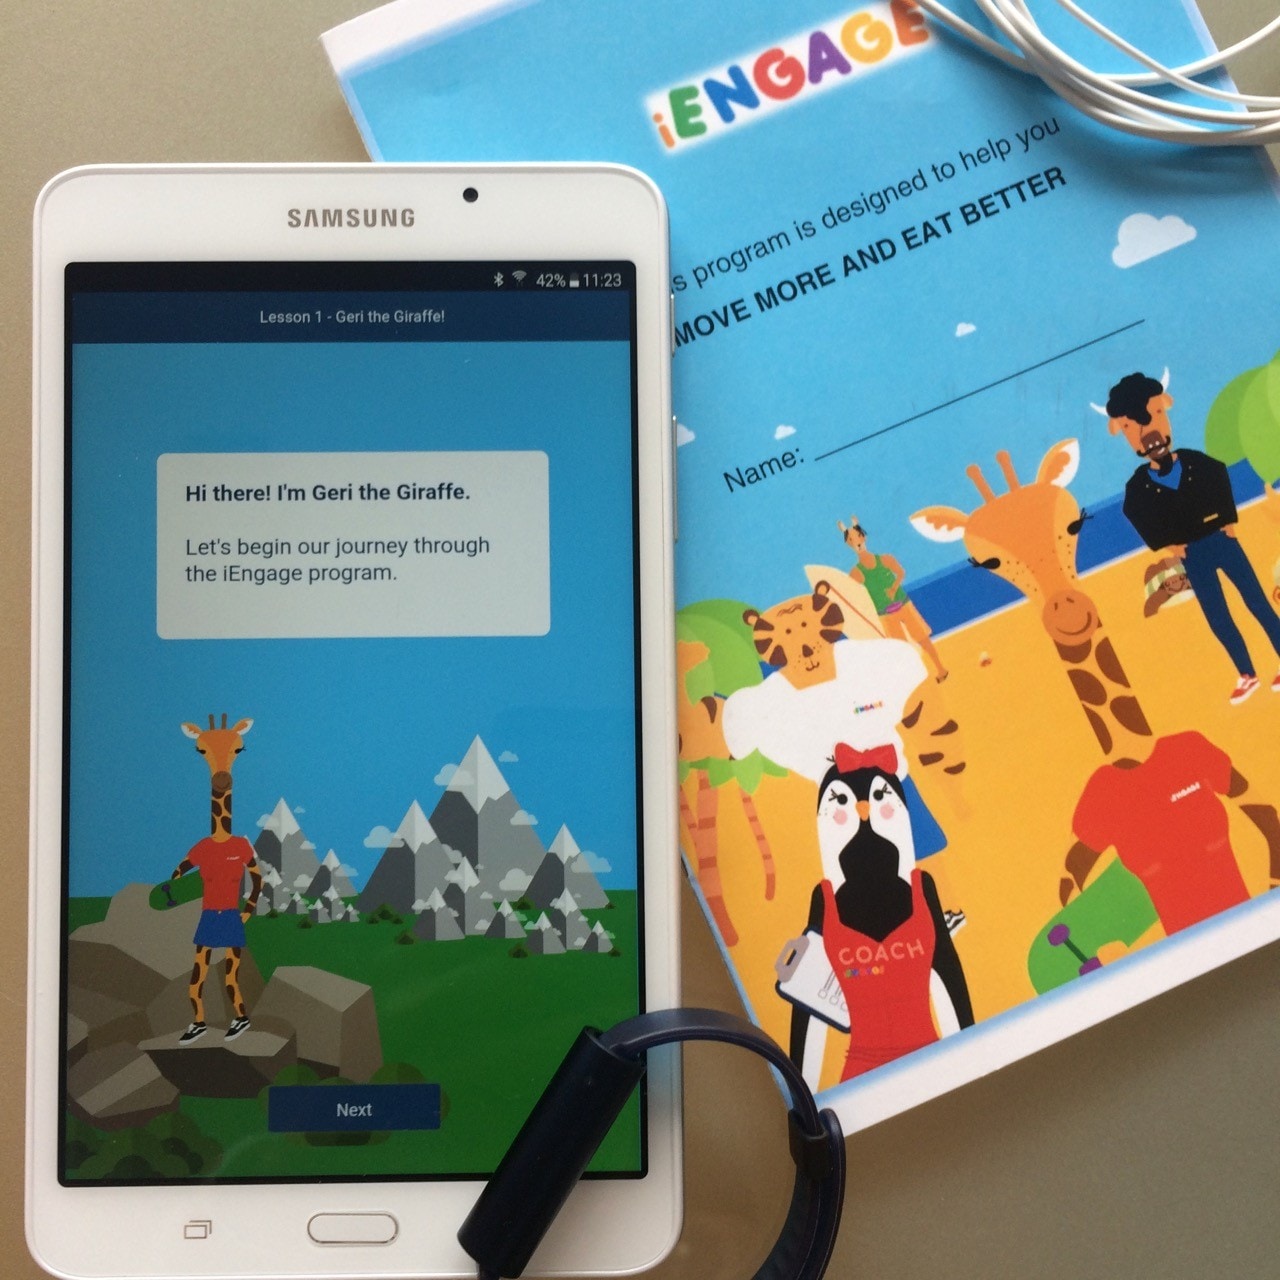 The IEngage app and booklet